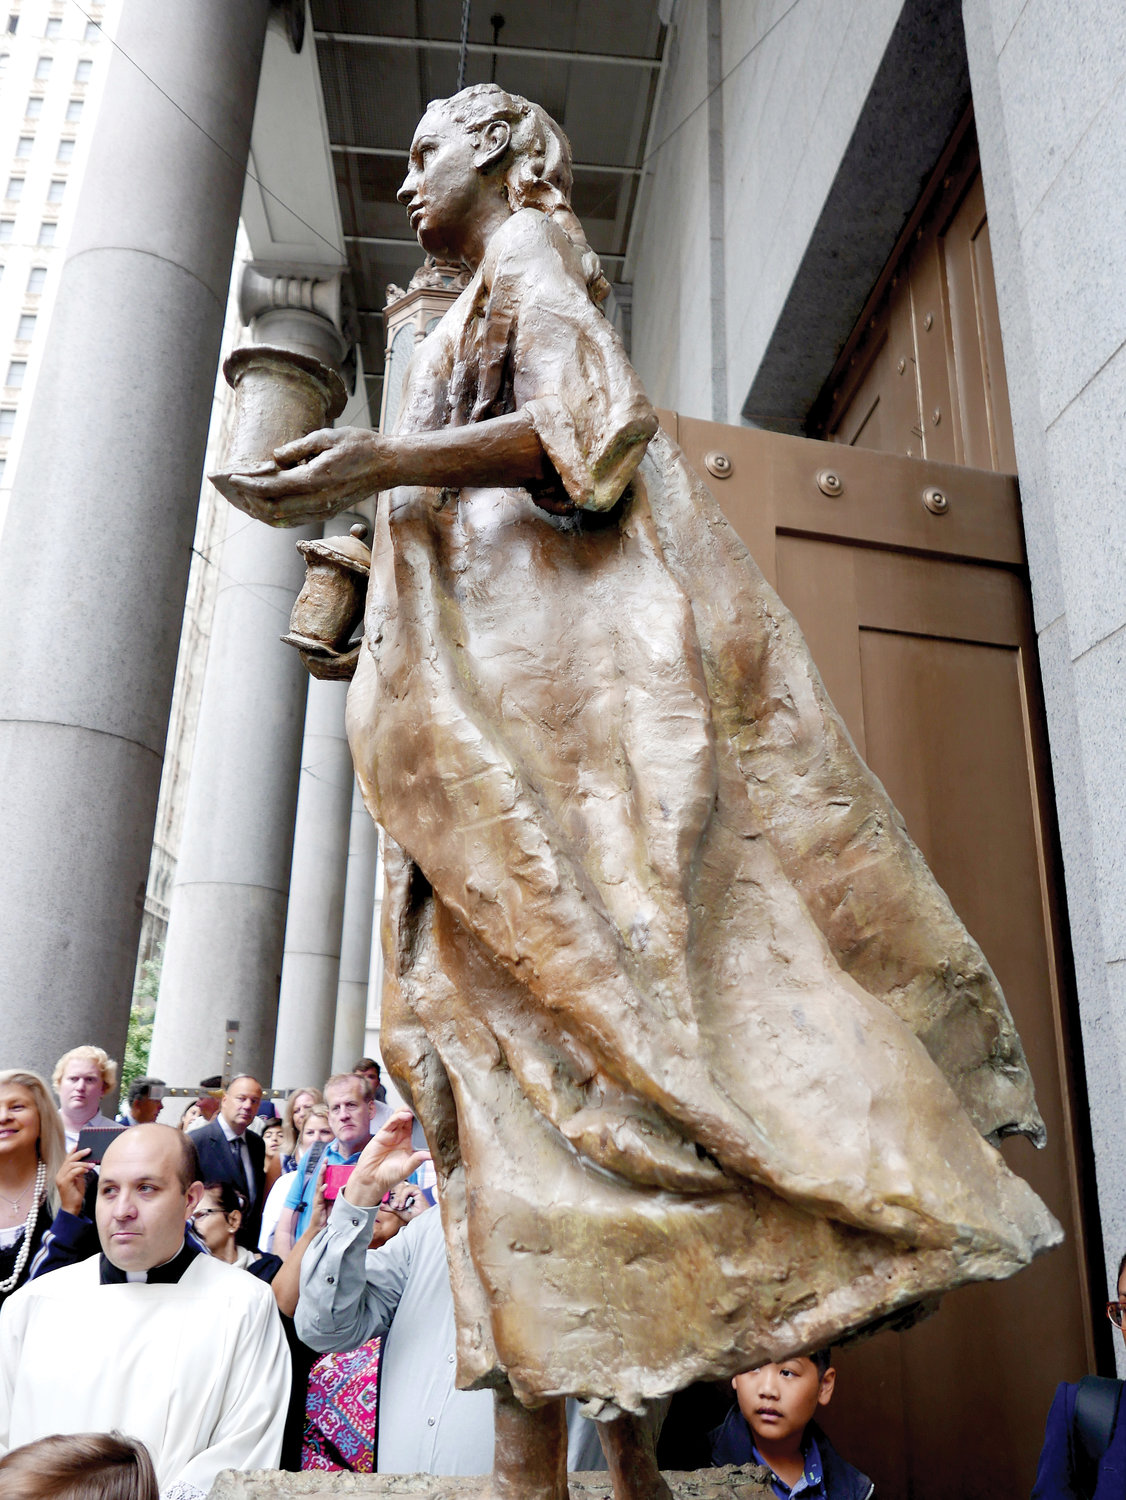 Bronze statues of St. Florian, patron saint of firefighters and EMTs, and St. Mary Magdalene, the first witness to the Resurrection, form a significant part of the 9/11 Catholic Memorial outside St. Peter’s Church in Lower Manhattan.